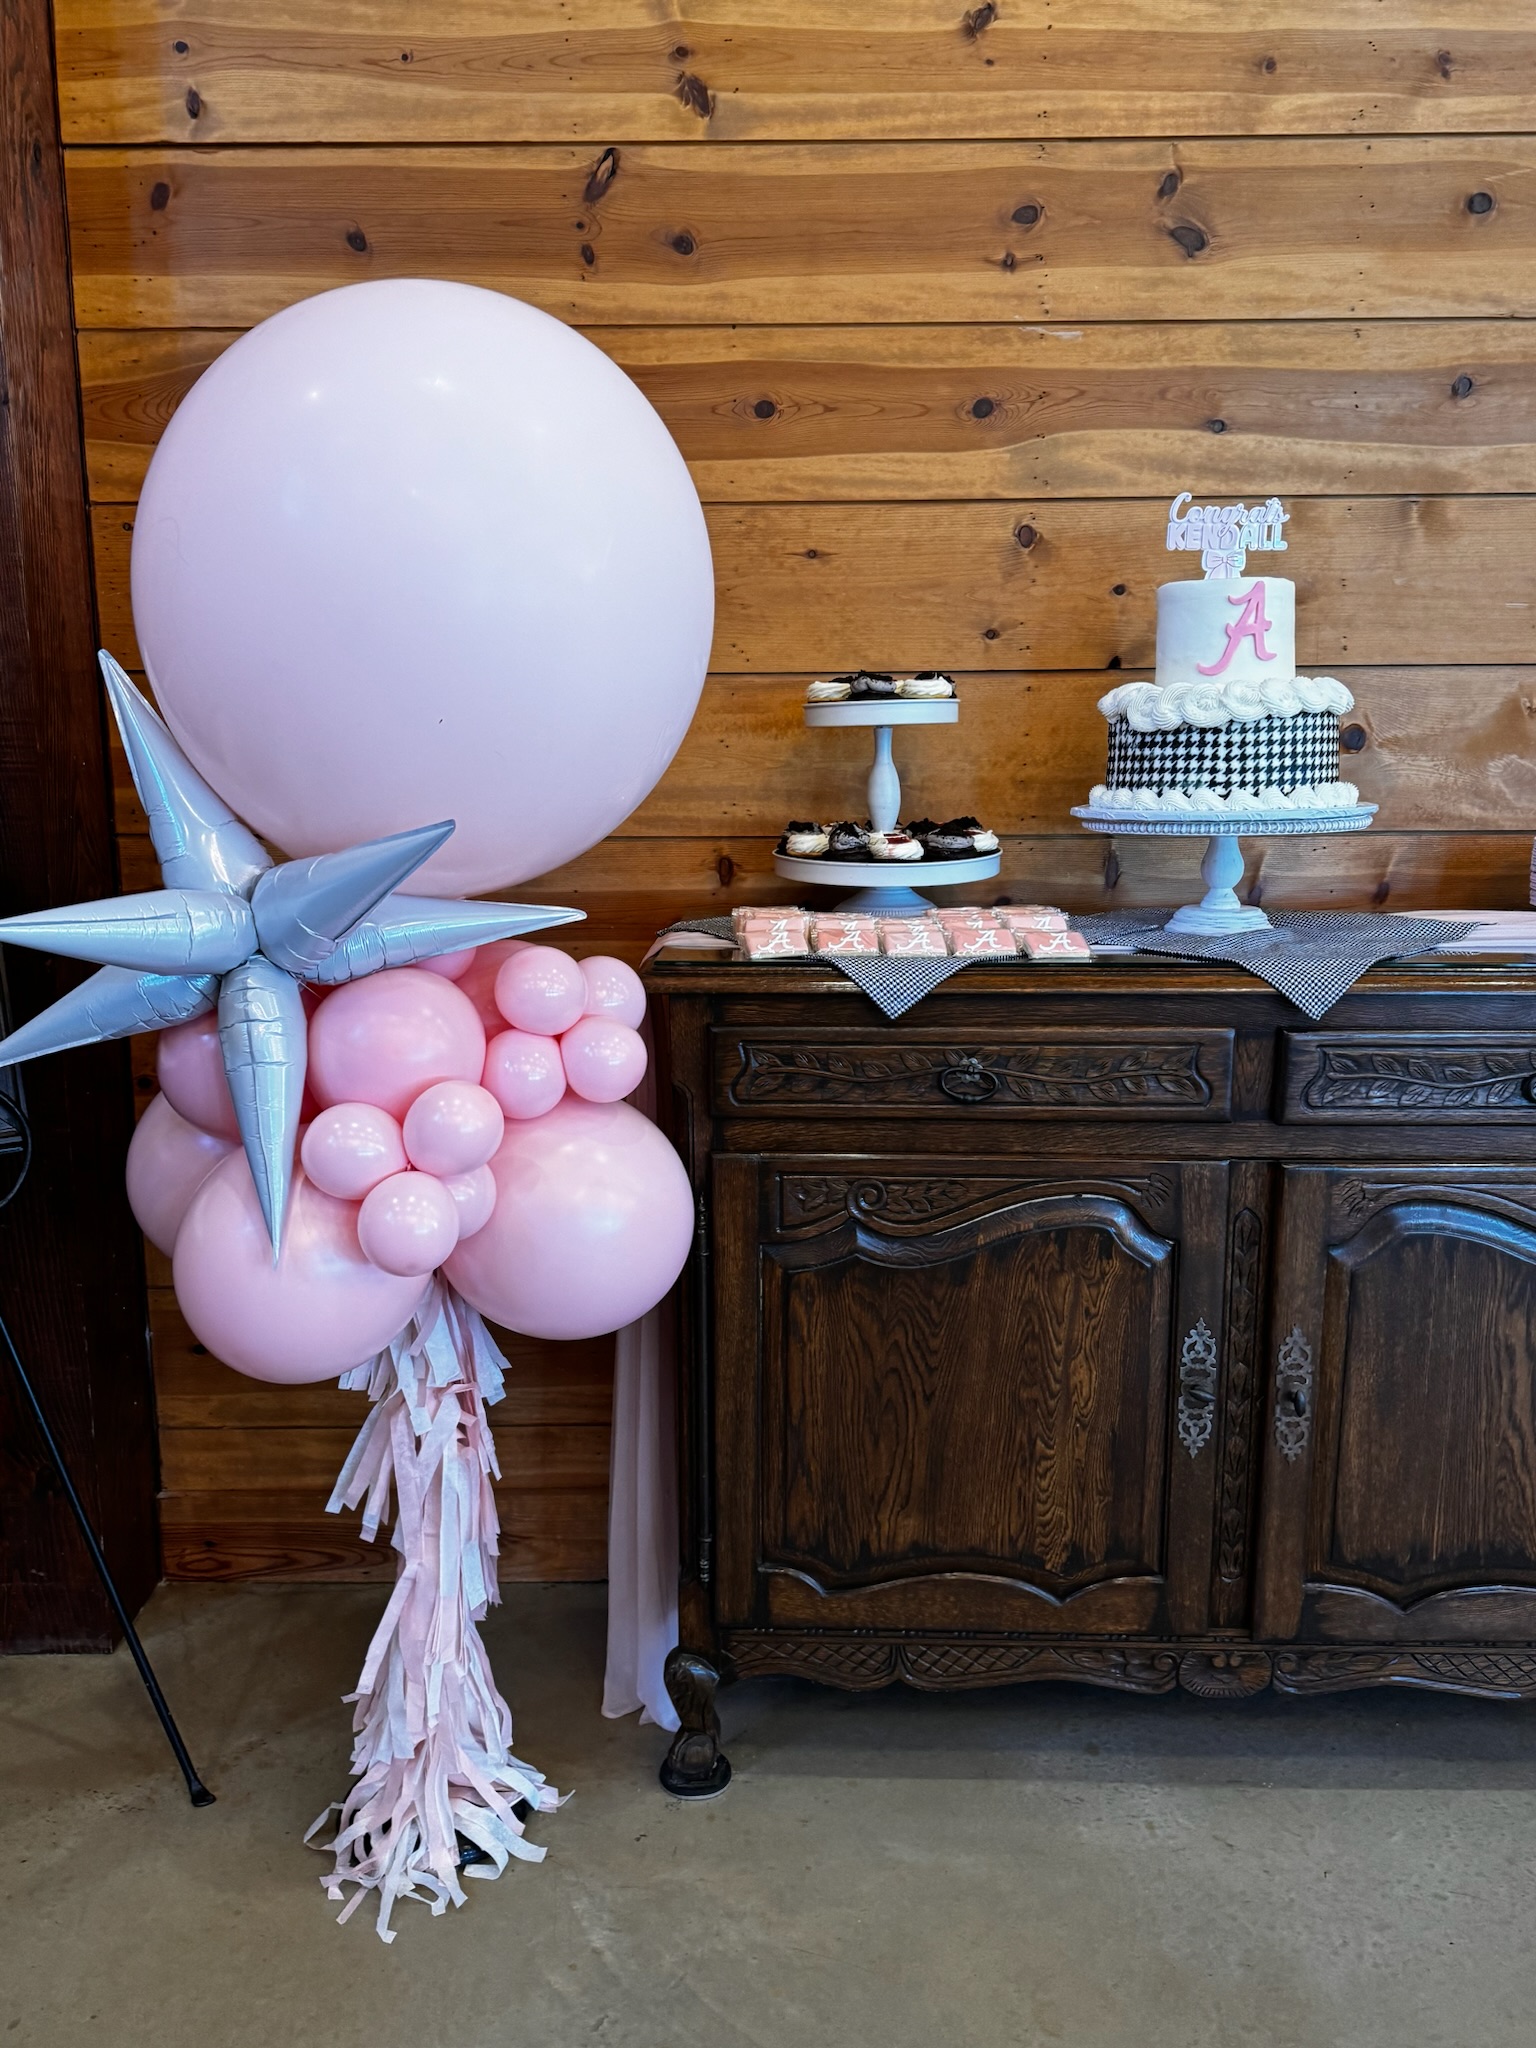 Small balloon cluster with matching black, white, and pink cakes and cupcakes.